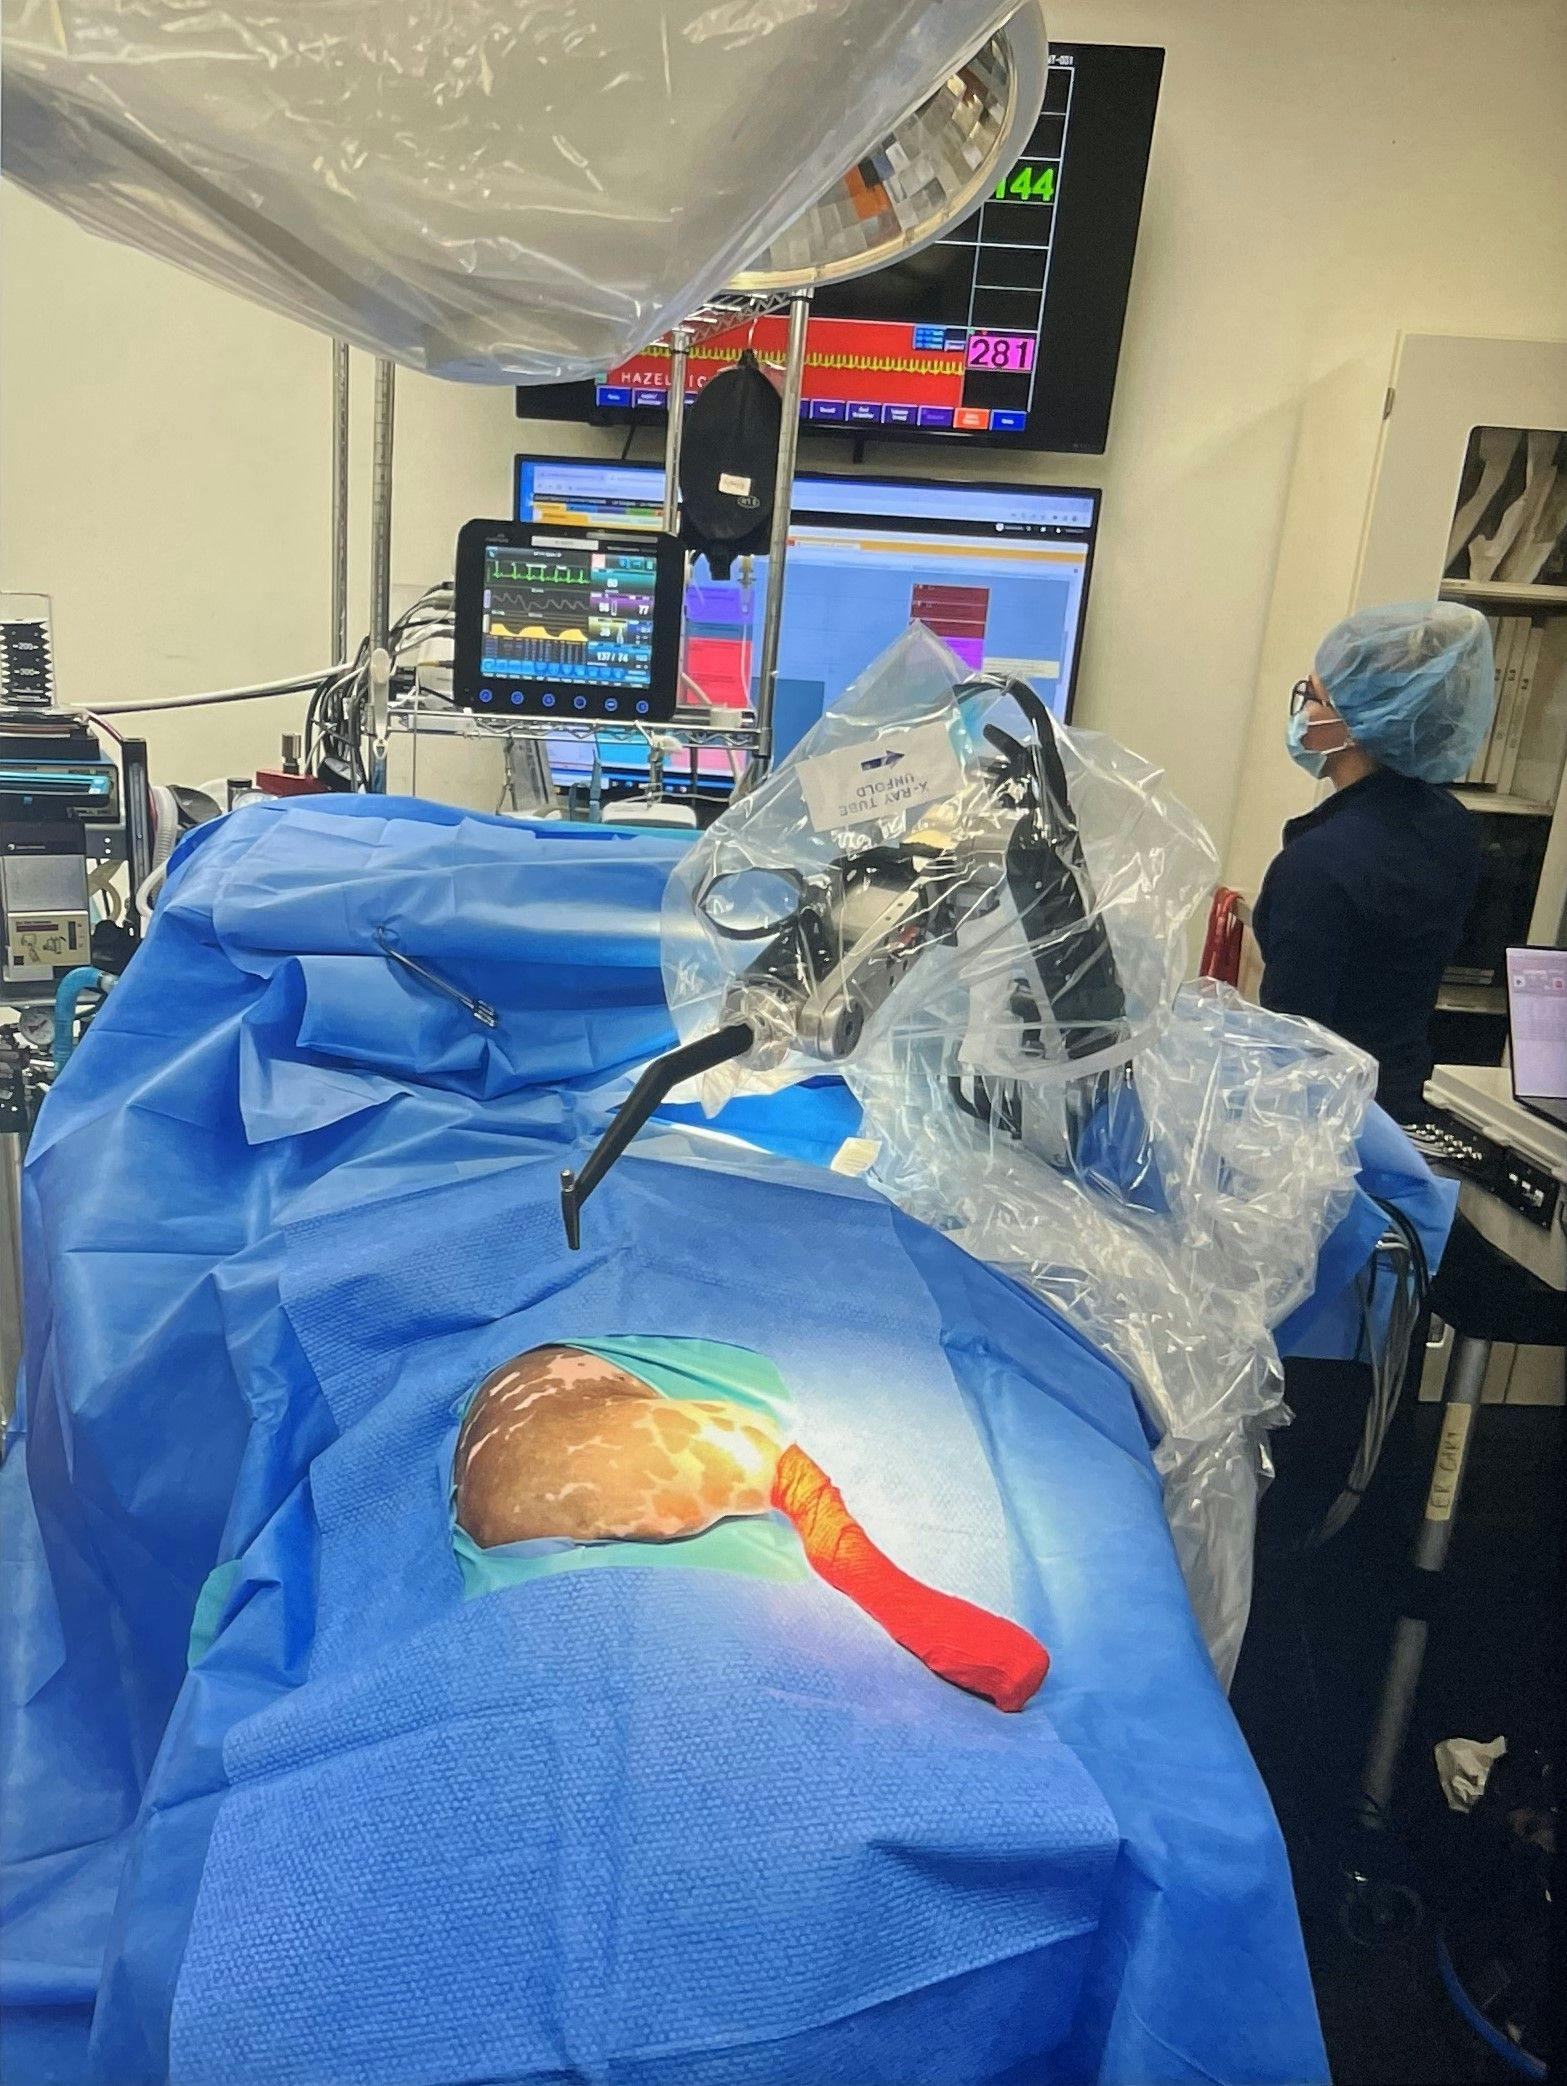 Robotic device used during orthopedic surgery. (Photo courtesy of ACCESS Bone and Joint Center and Thrive Pet Healthcare)